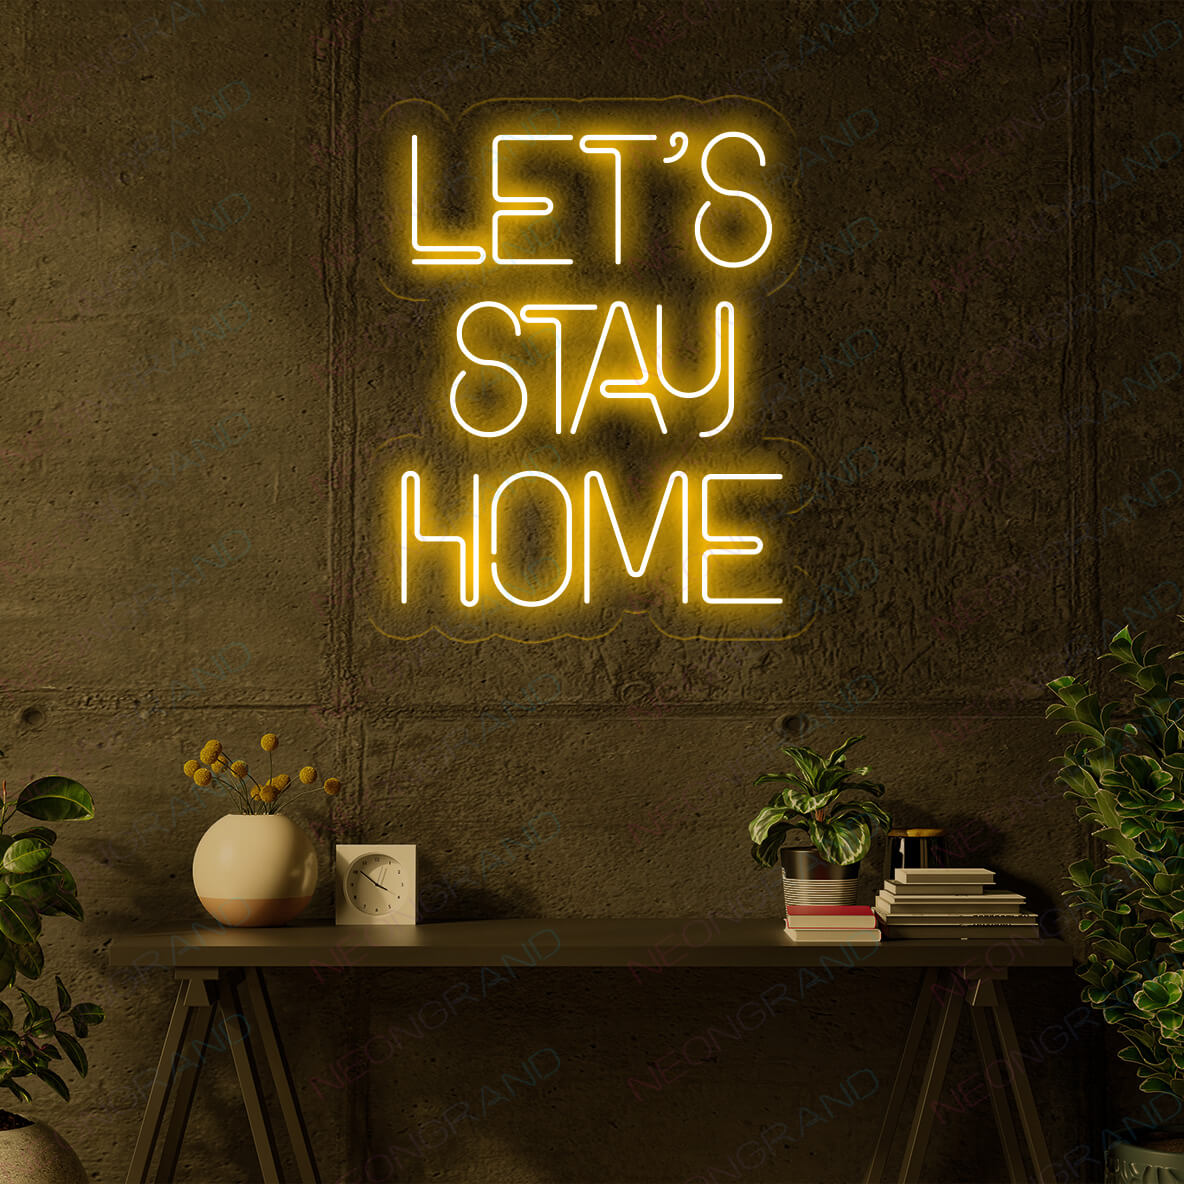 Let's Stay Home Neon Sign Led Light orange yellow